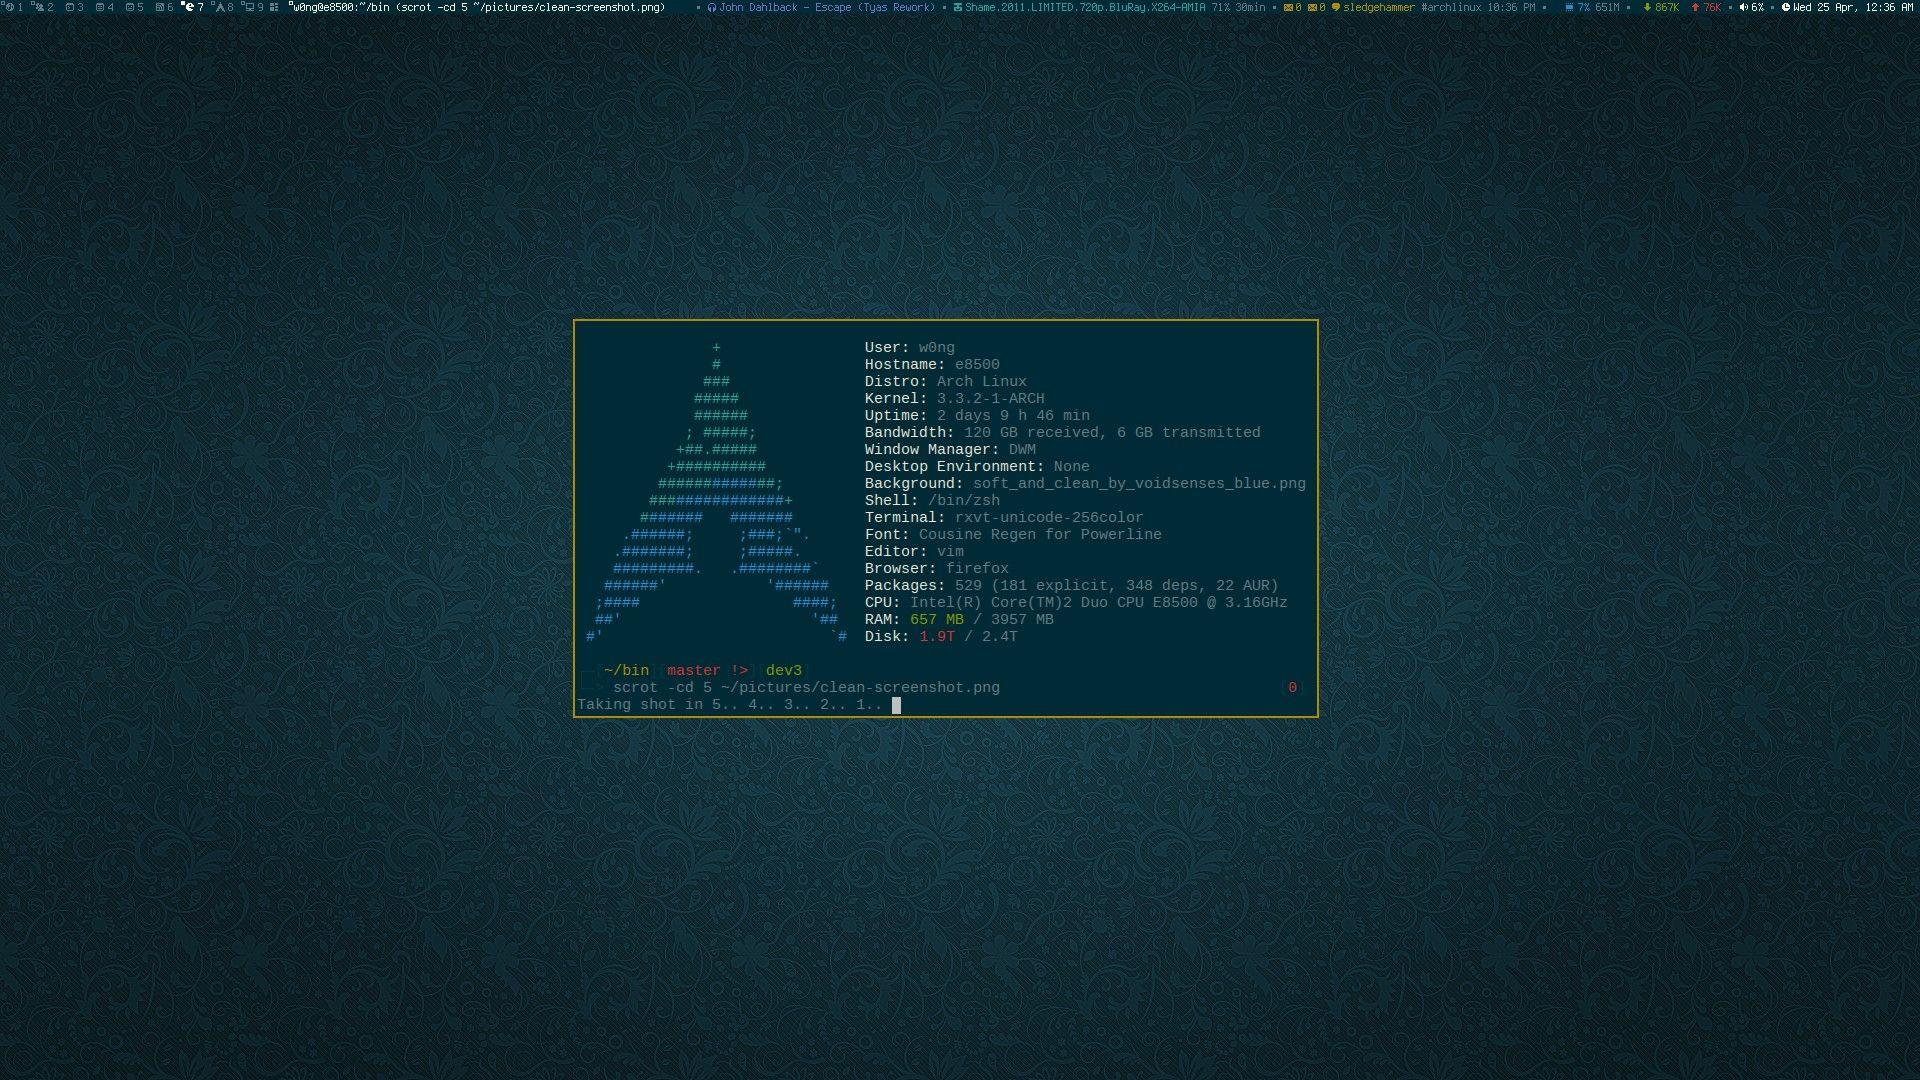 arch linux image viewer